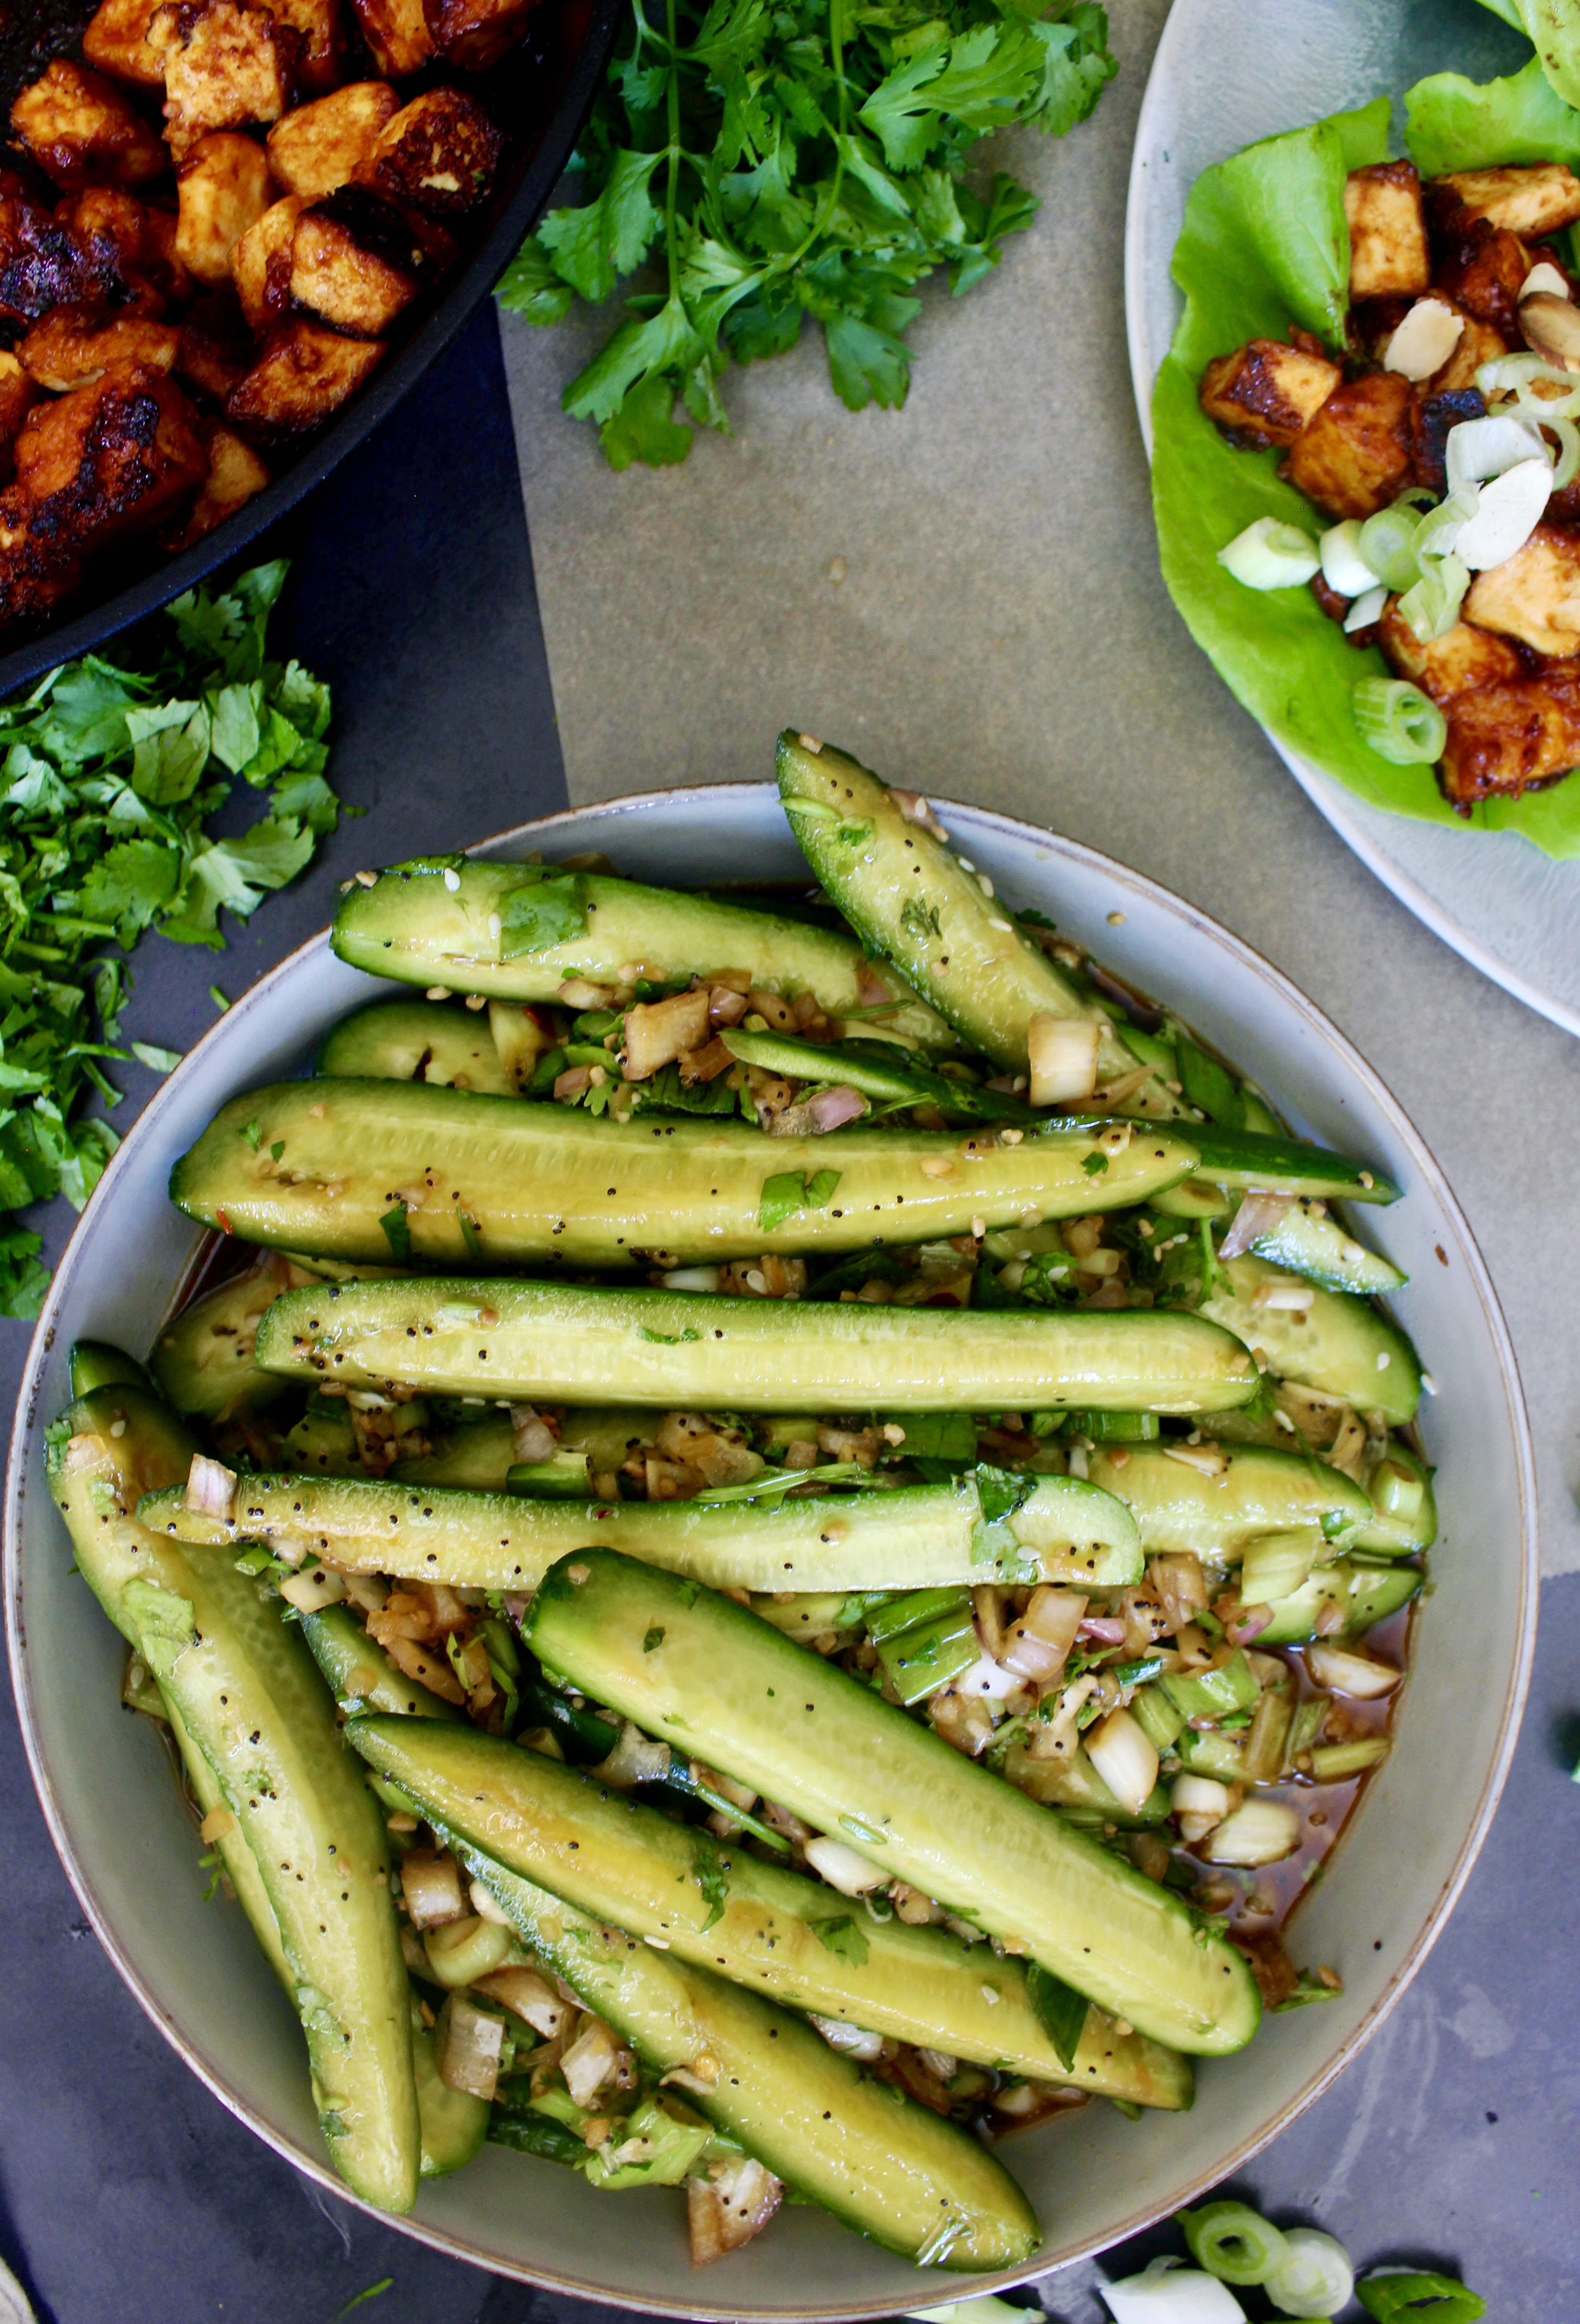 Crunchy persian cucumbers, shallots, and scallions marinated tossed with a simple sweet and tangy Asian vinaigrette with crispy sesame seeds: this Marinated Asian Cucumber Scallion Salad truly hits all the marks!